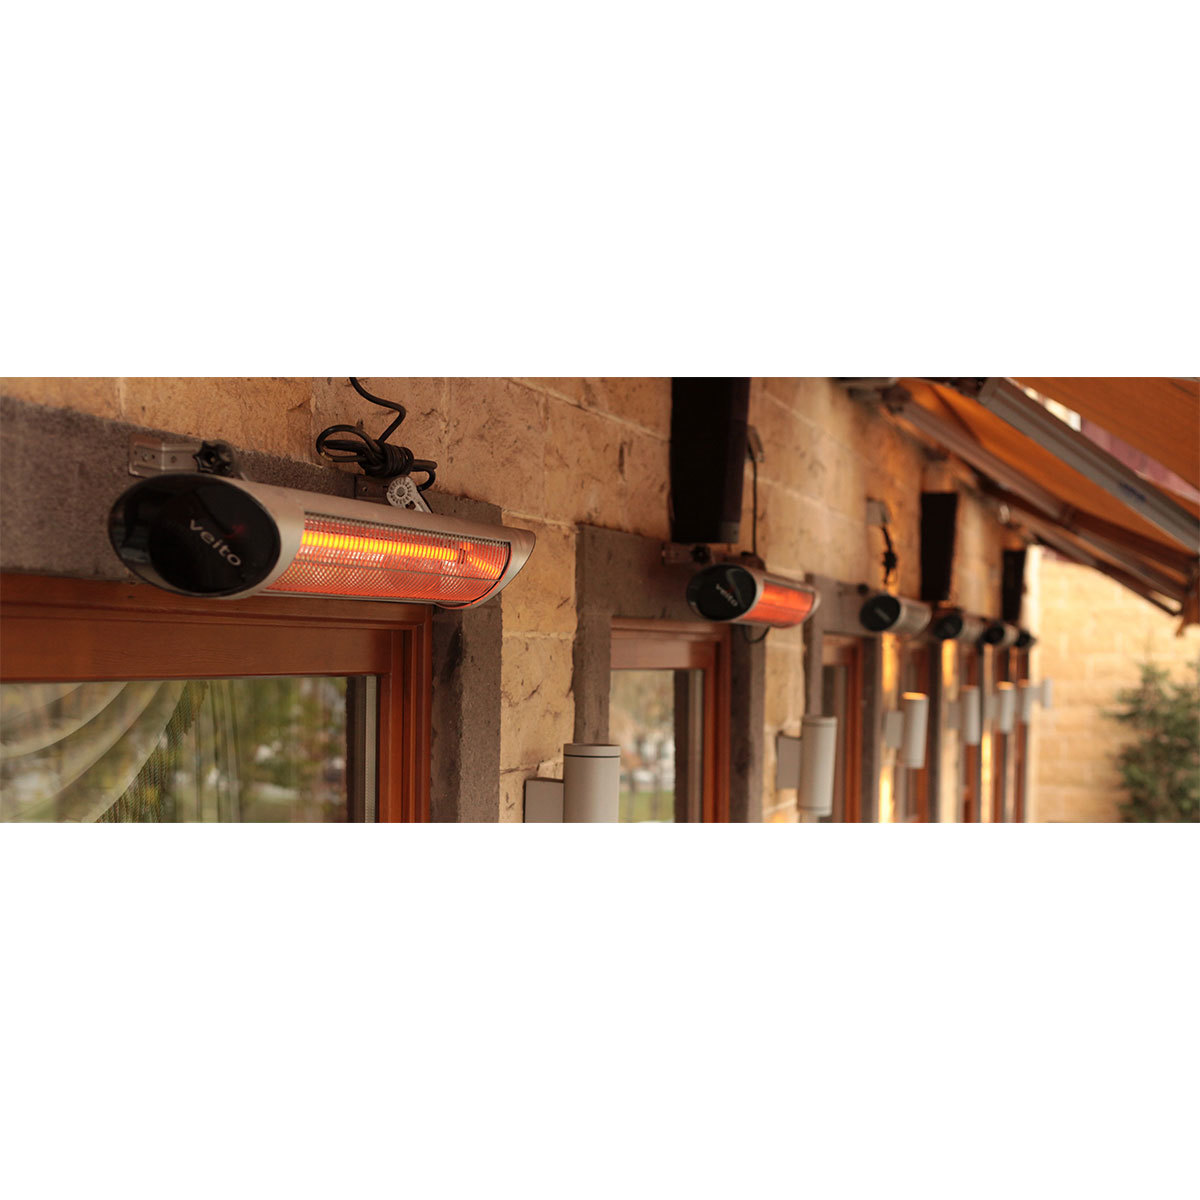 Veito Blade Carbon Infrared Heater mounted above windows